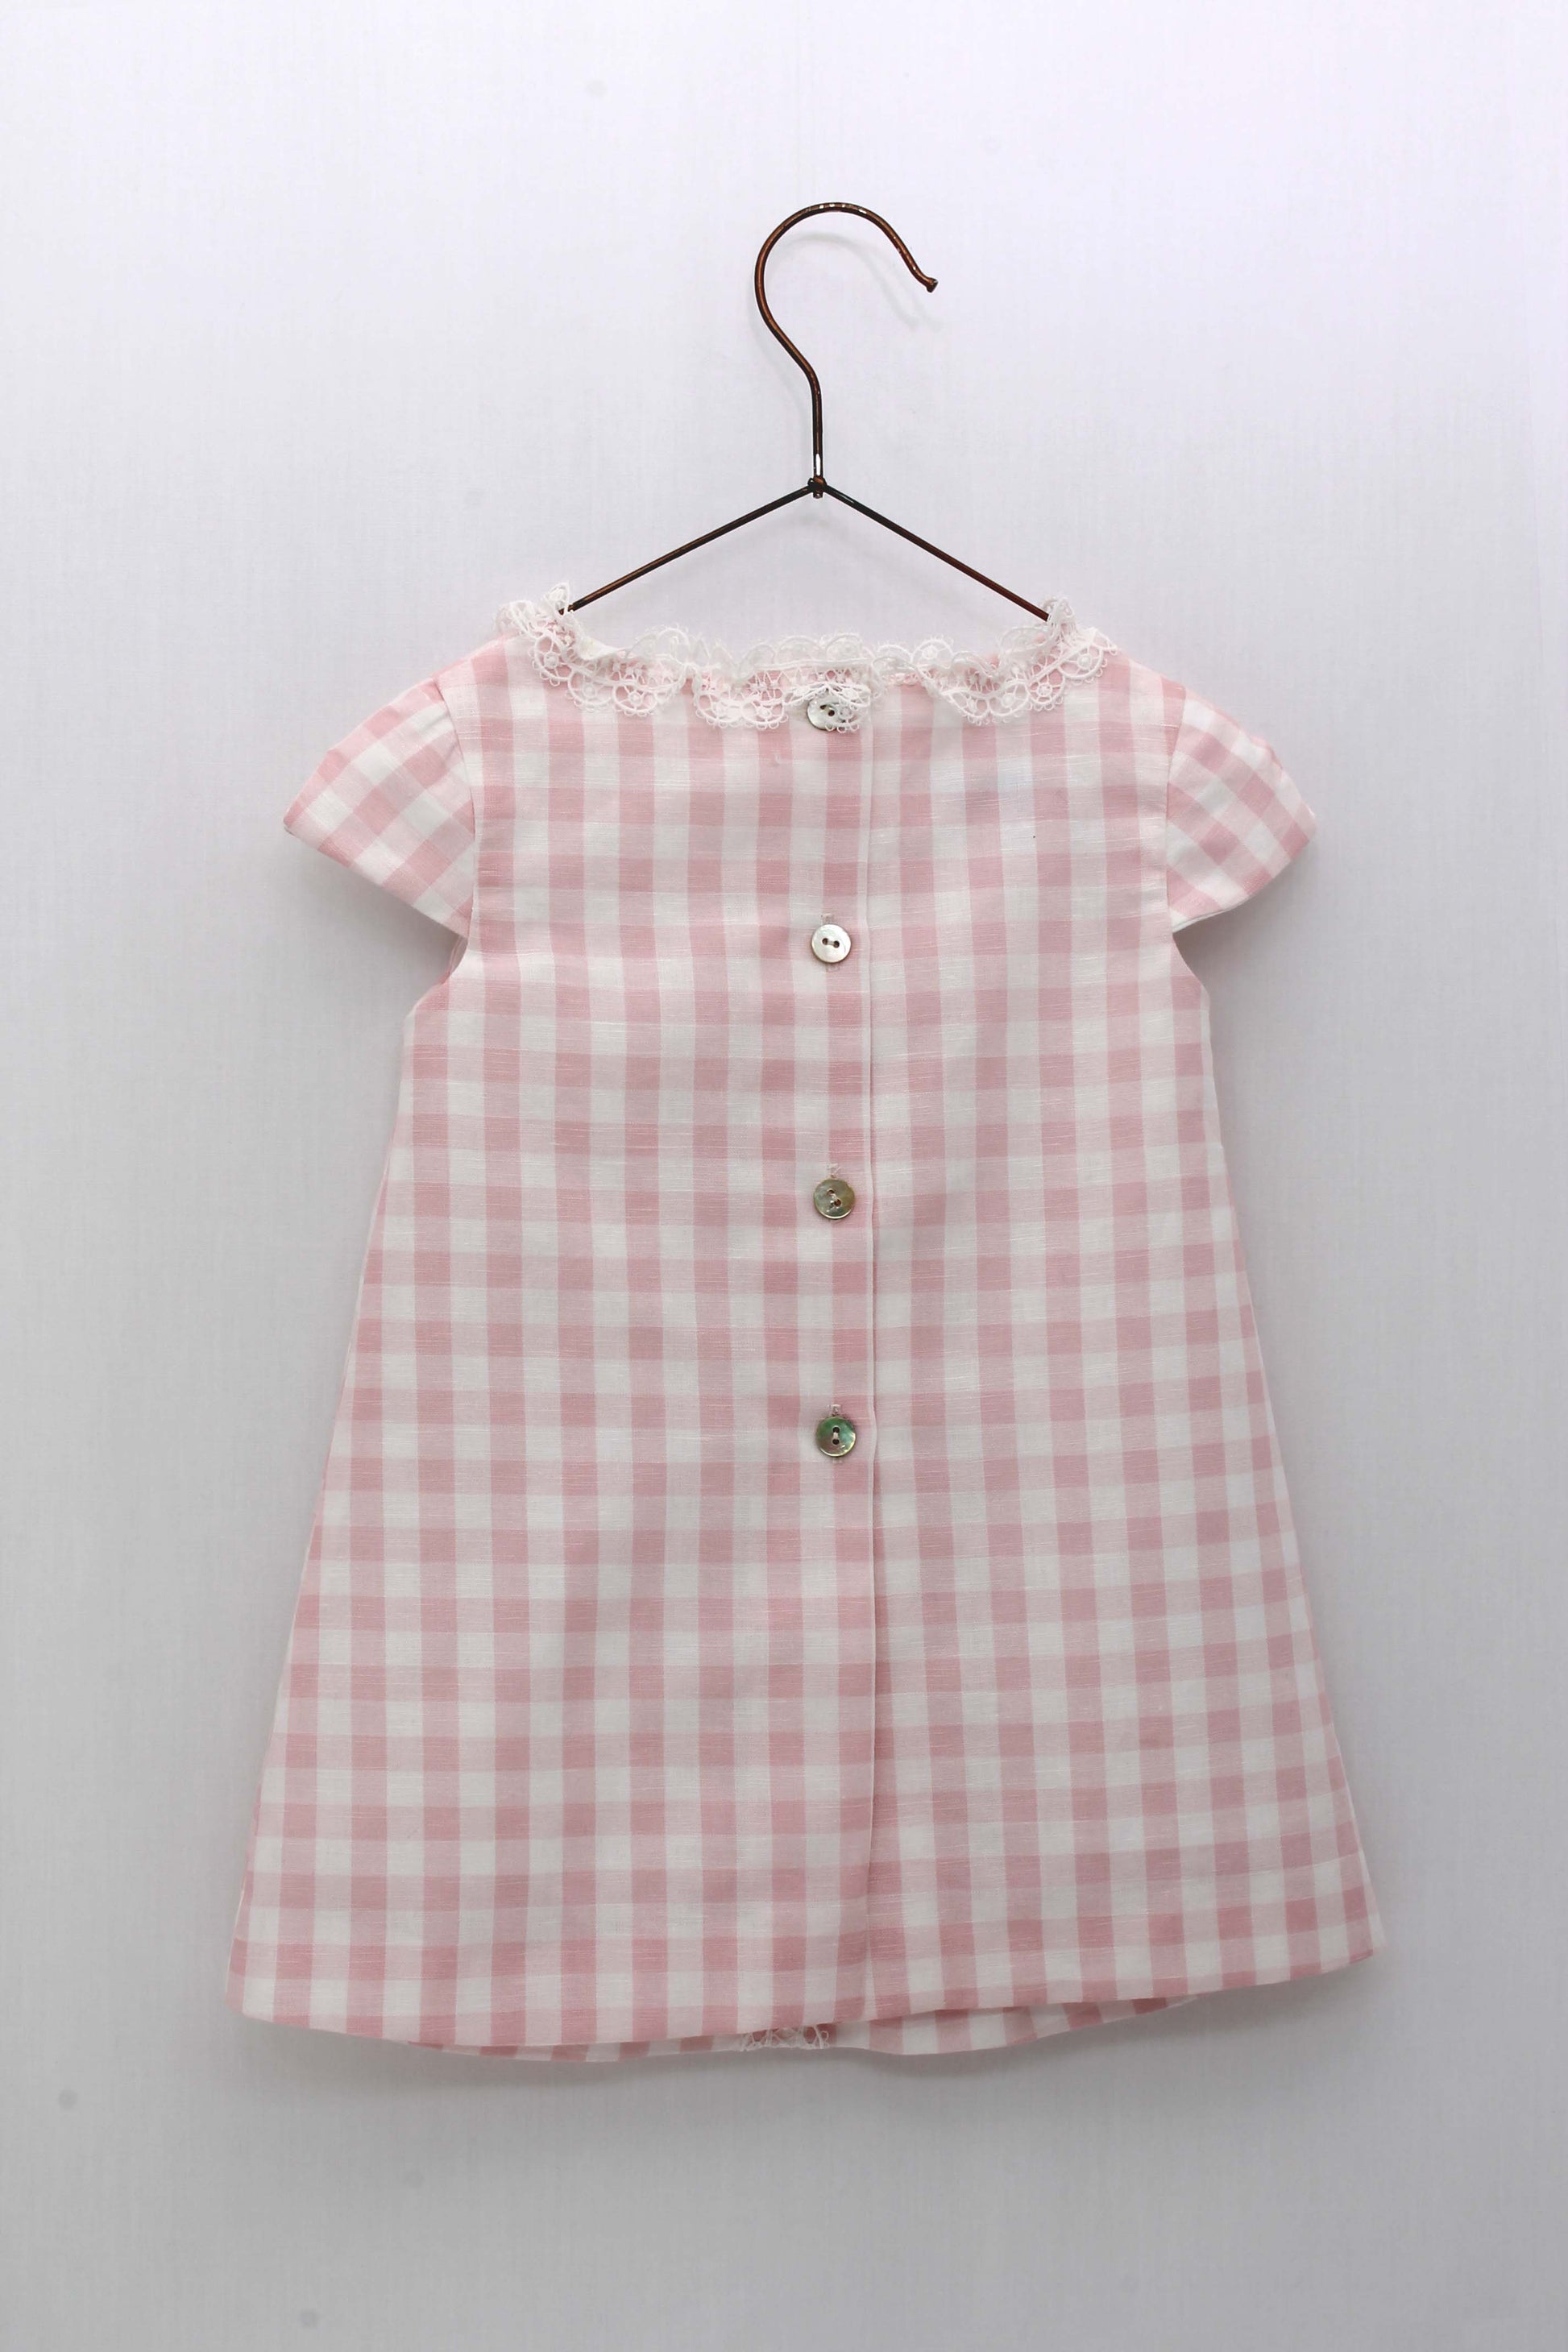 SS23 FOQUE Dulce Pink Gingham Check Baby Girls Dress